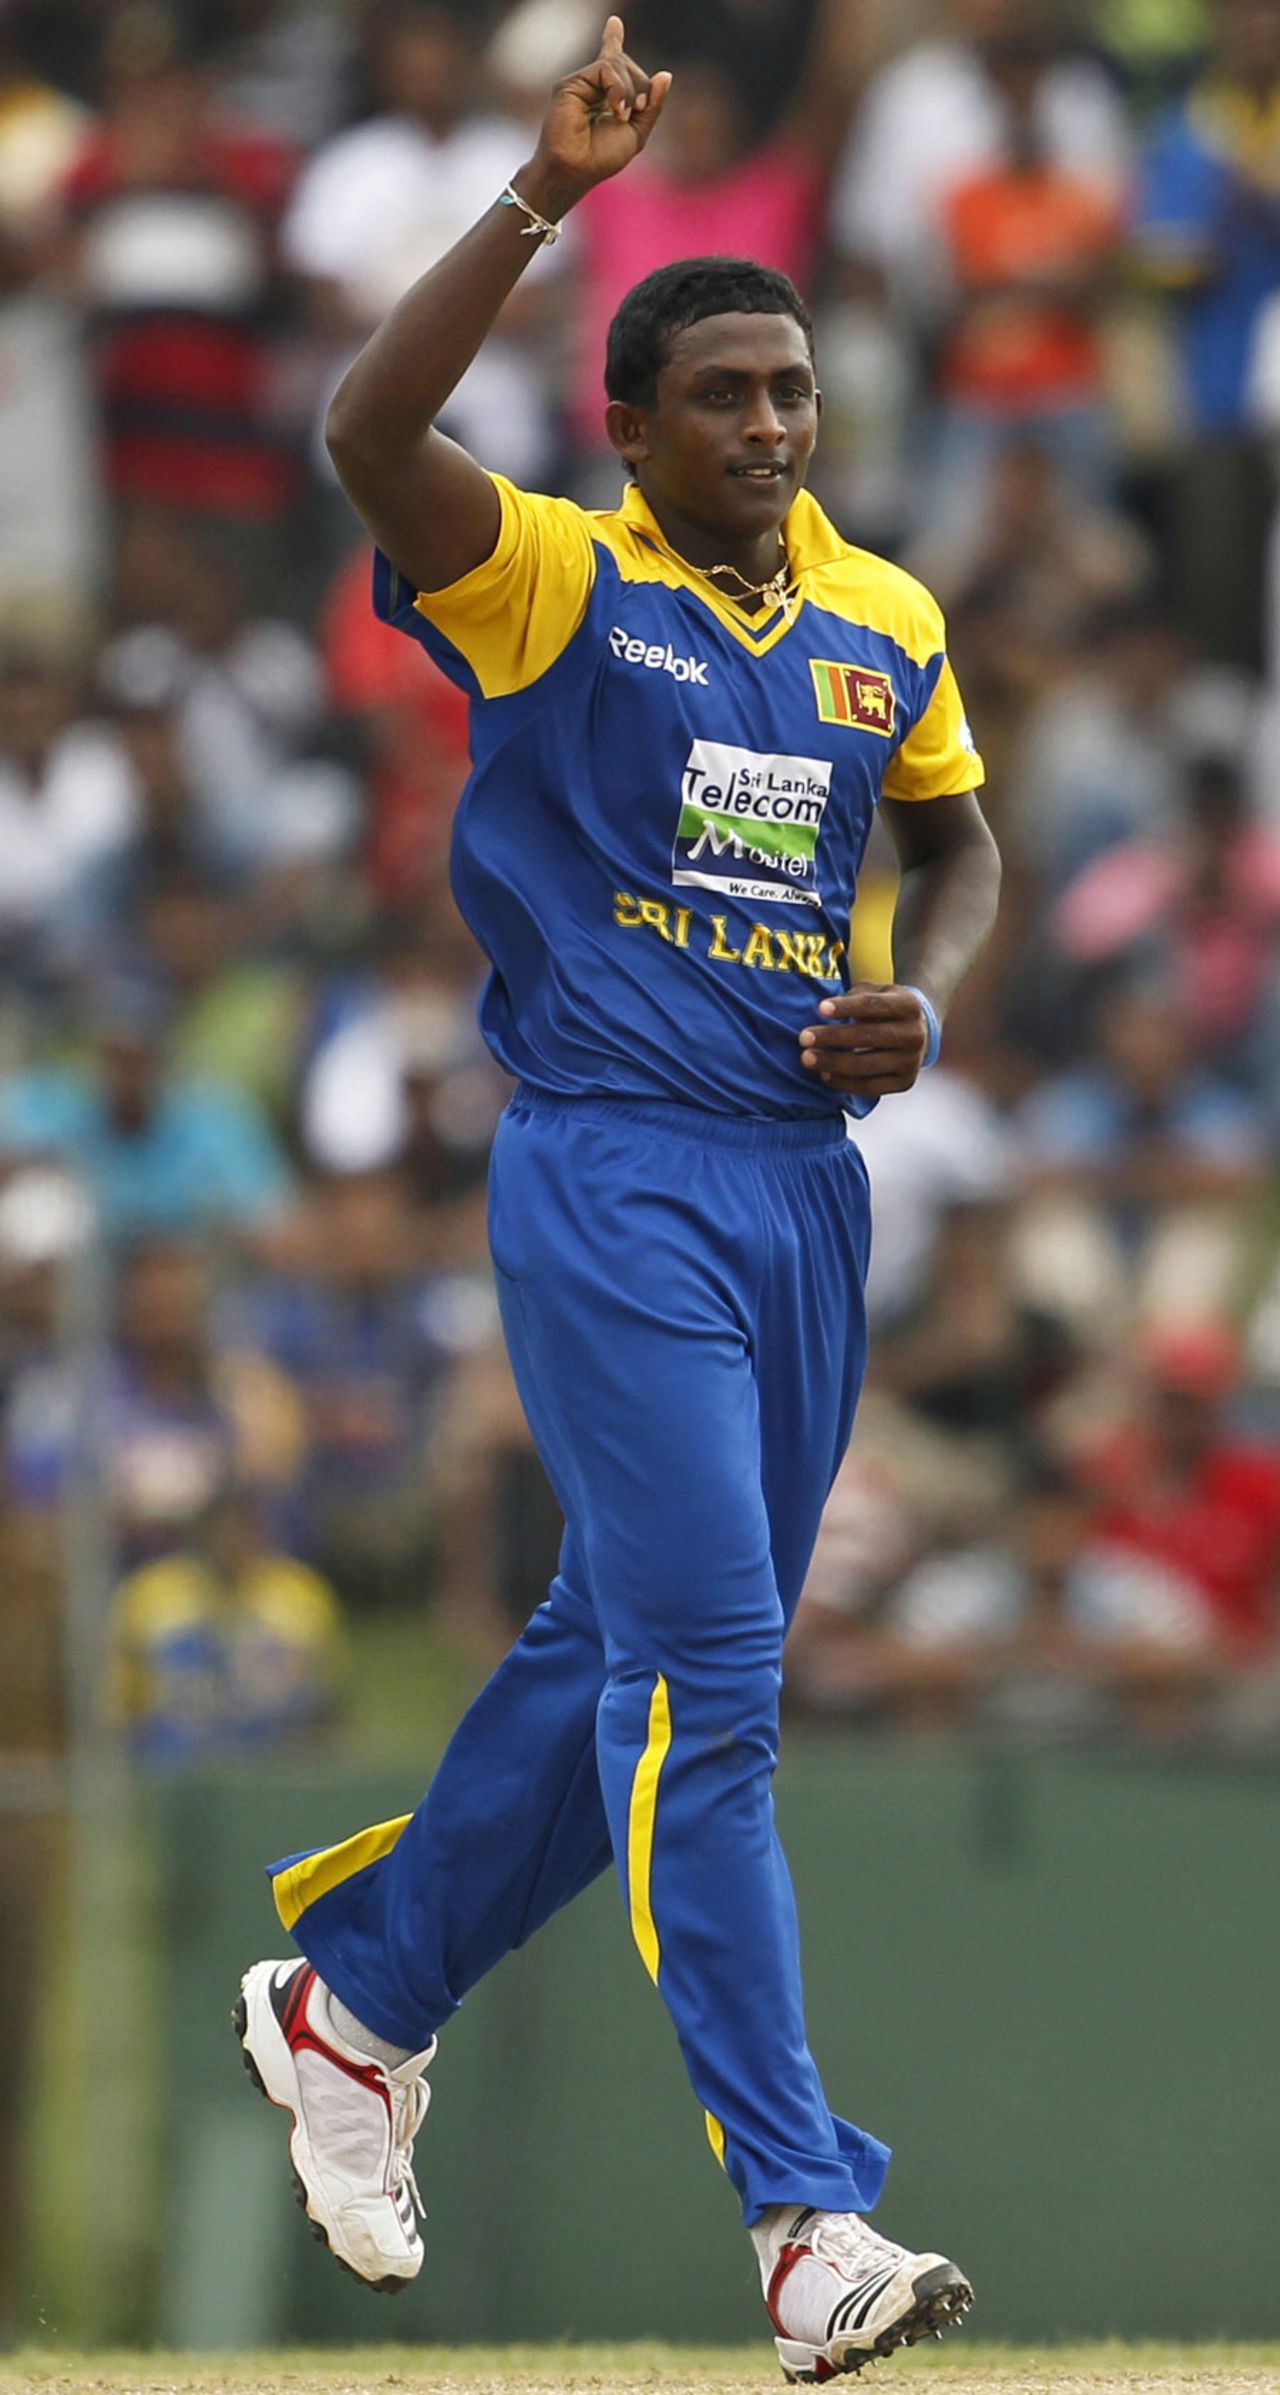 Ajantha Mendis celebrates one of his four wickets, Sri Lanka v West Indies, 3rd ODI, SSC, February 6, 2011